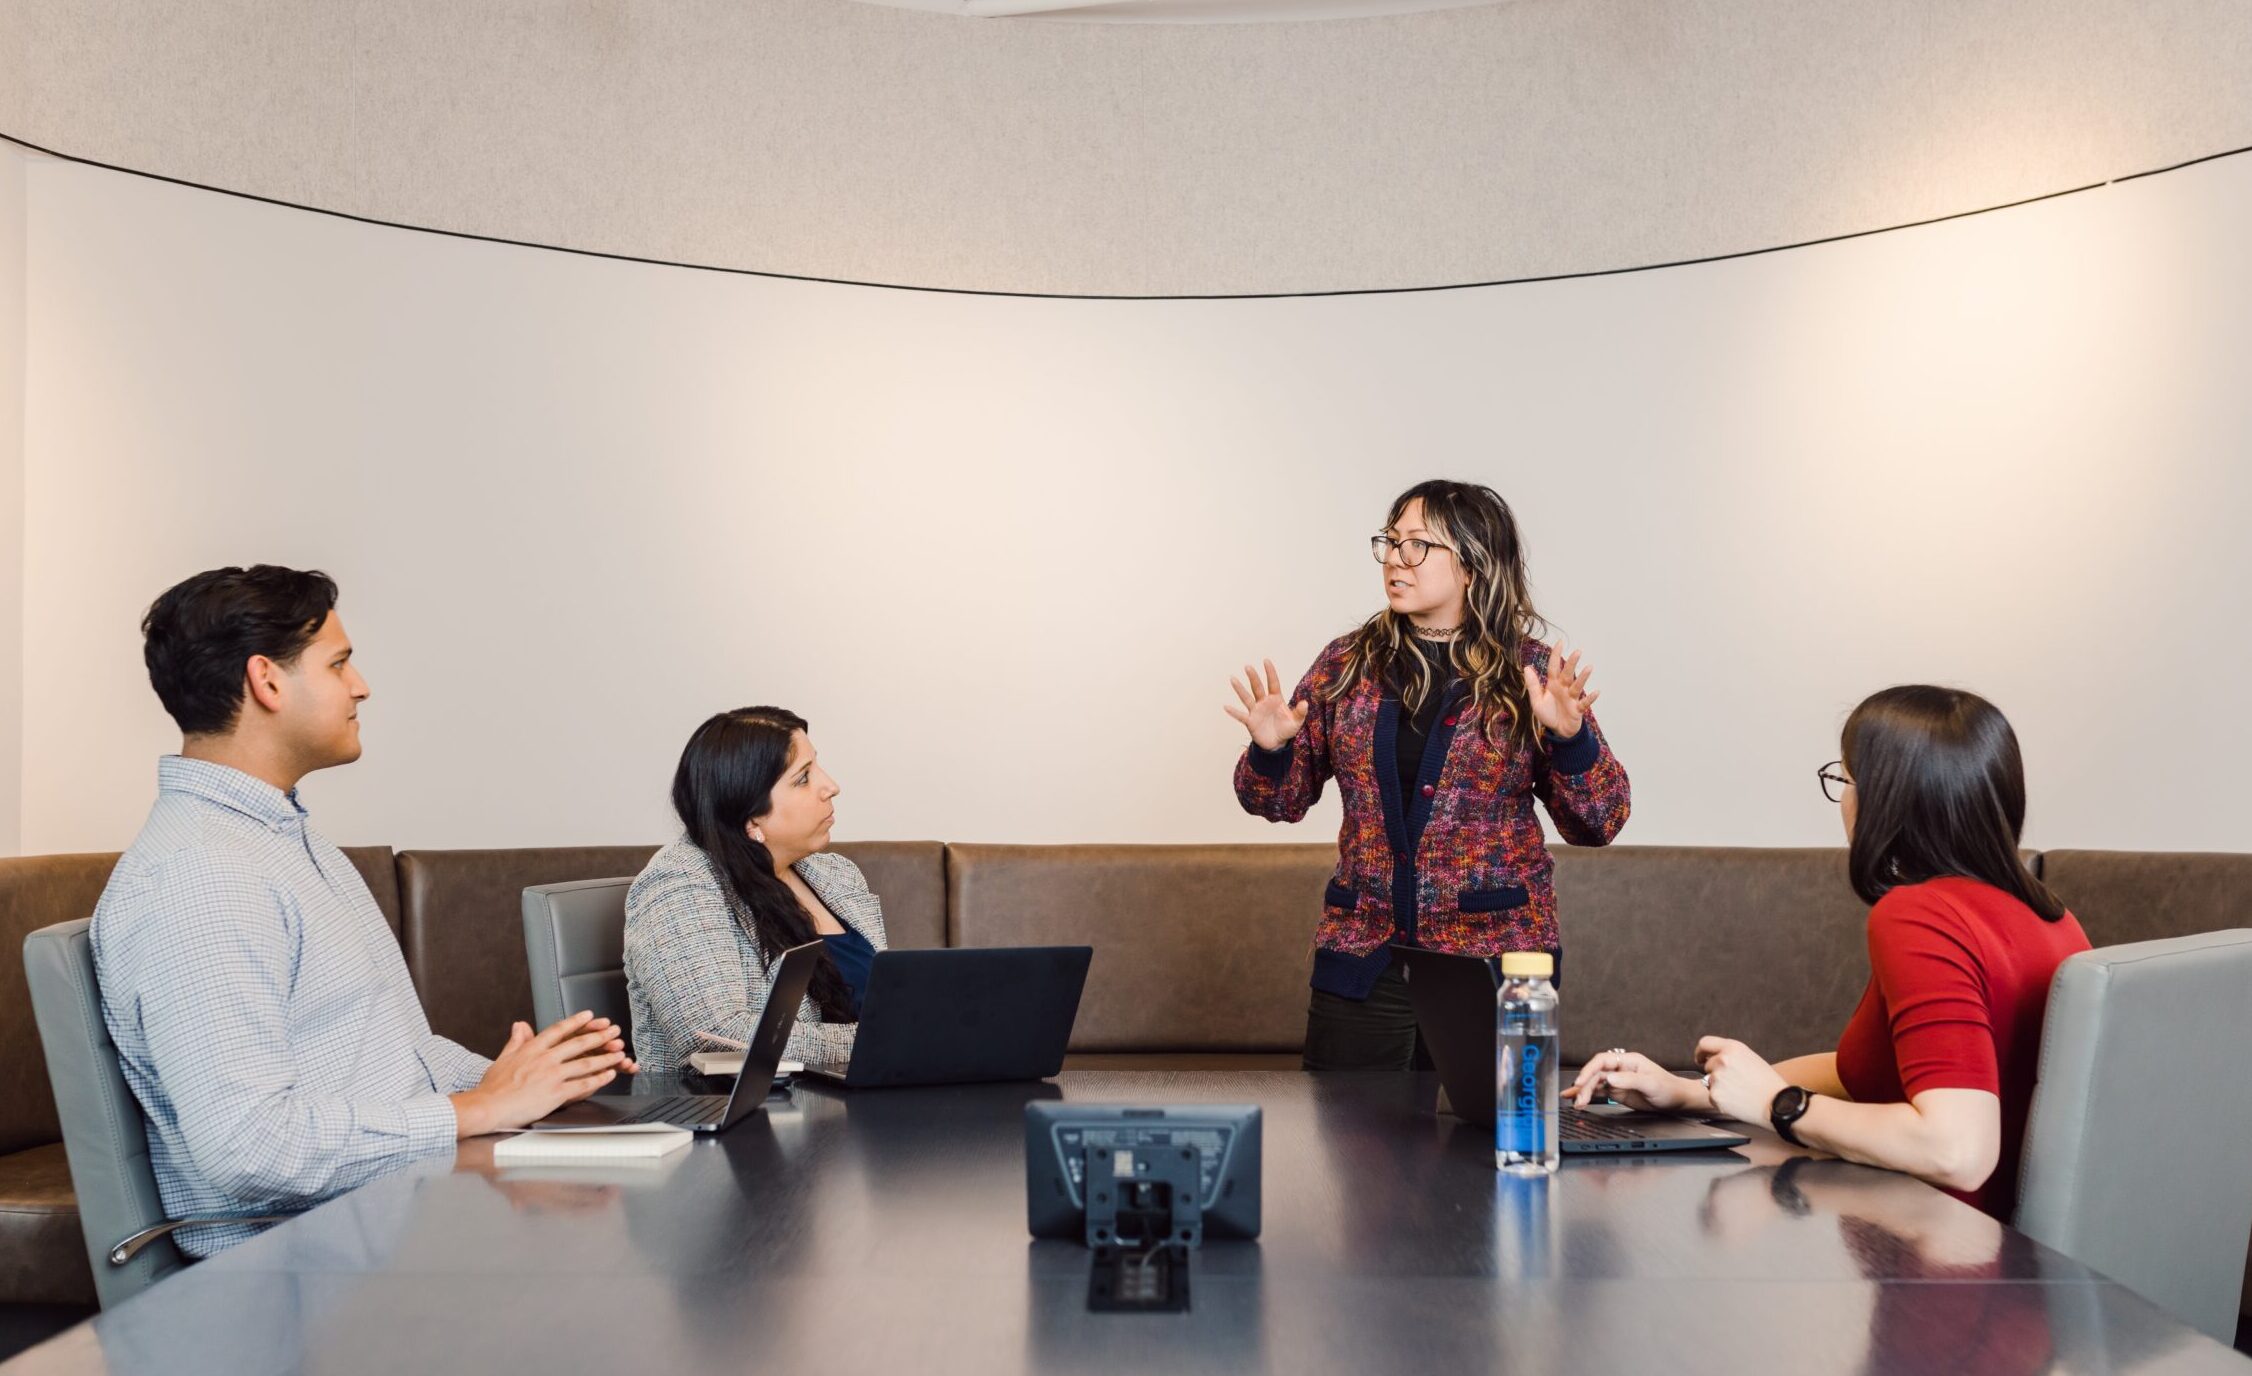 Employee leading a discussion with the team during a meeting